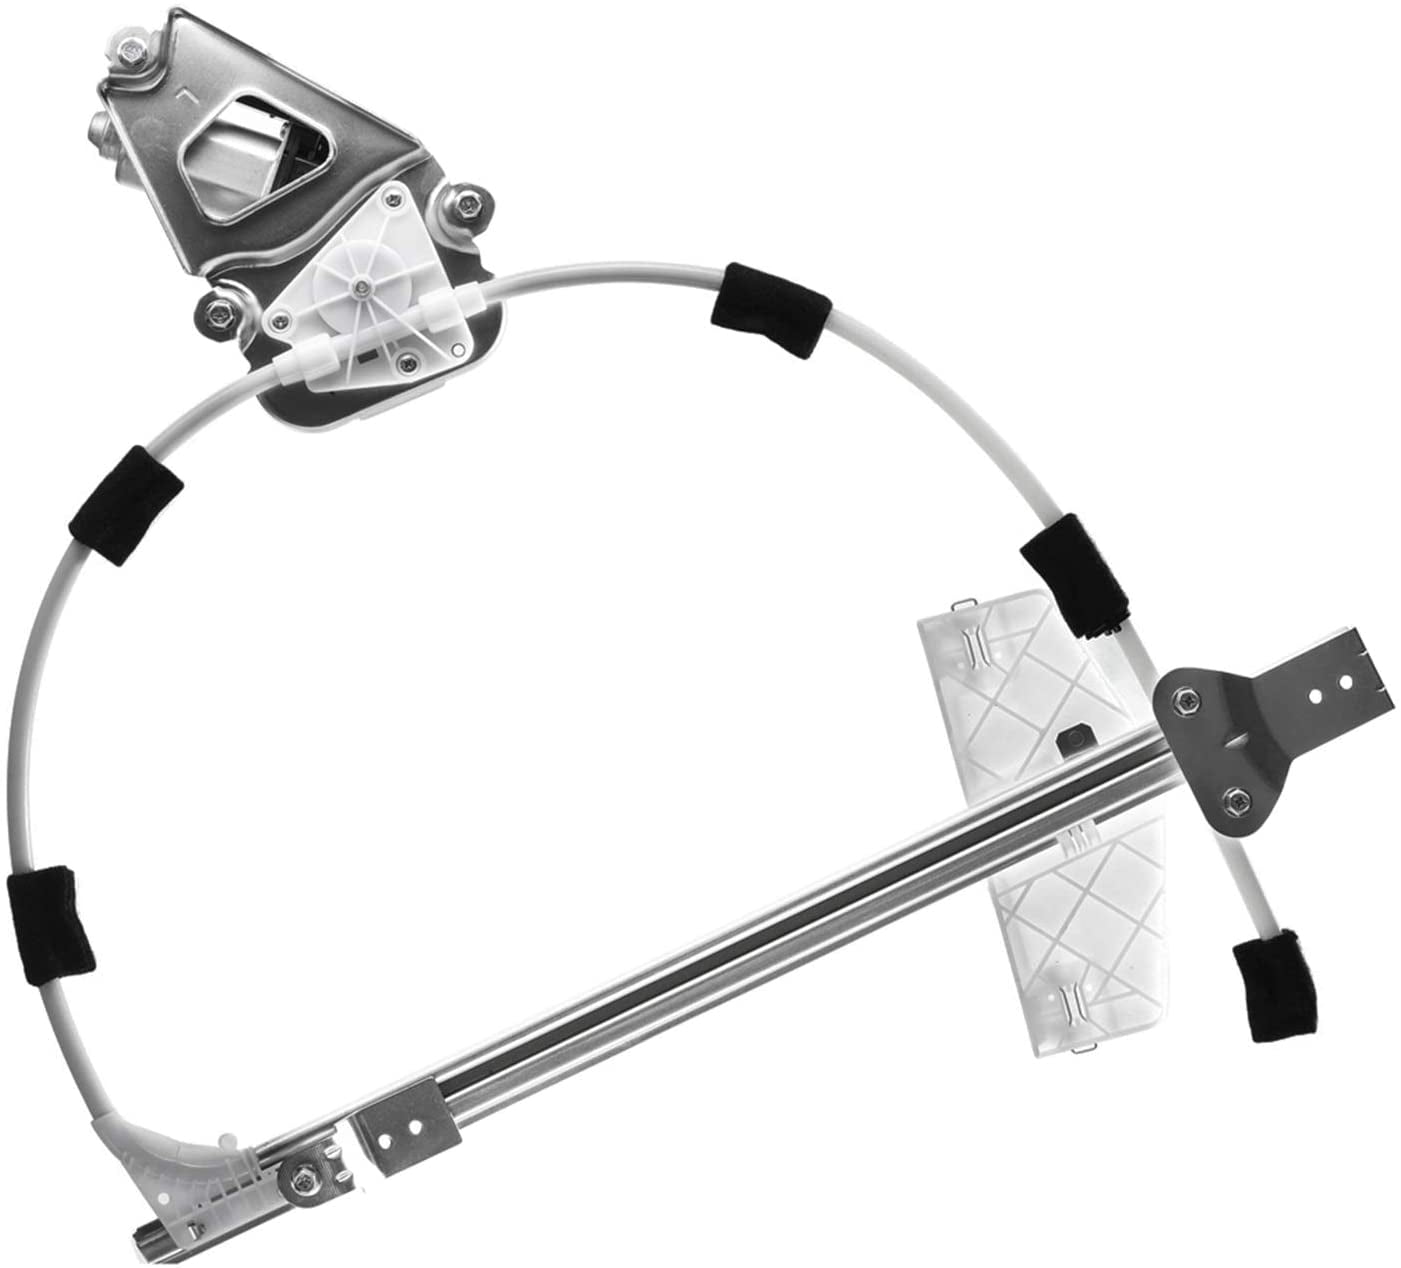 A-Premium Power Window Regulator and Motor Assembly for Jeep Liberty KJ 2002-2006 Rear Right Passenger Side 